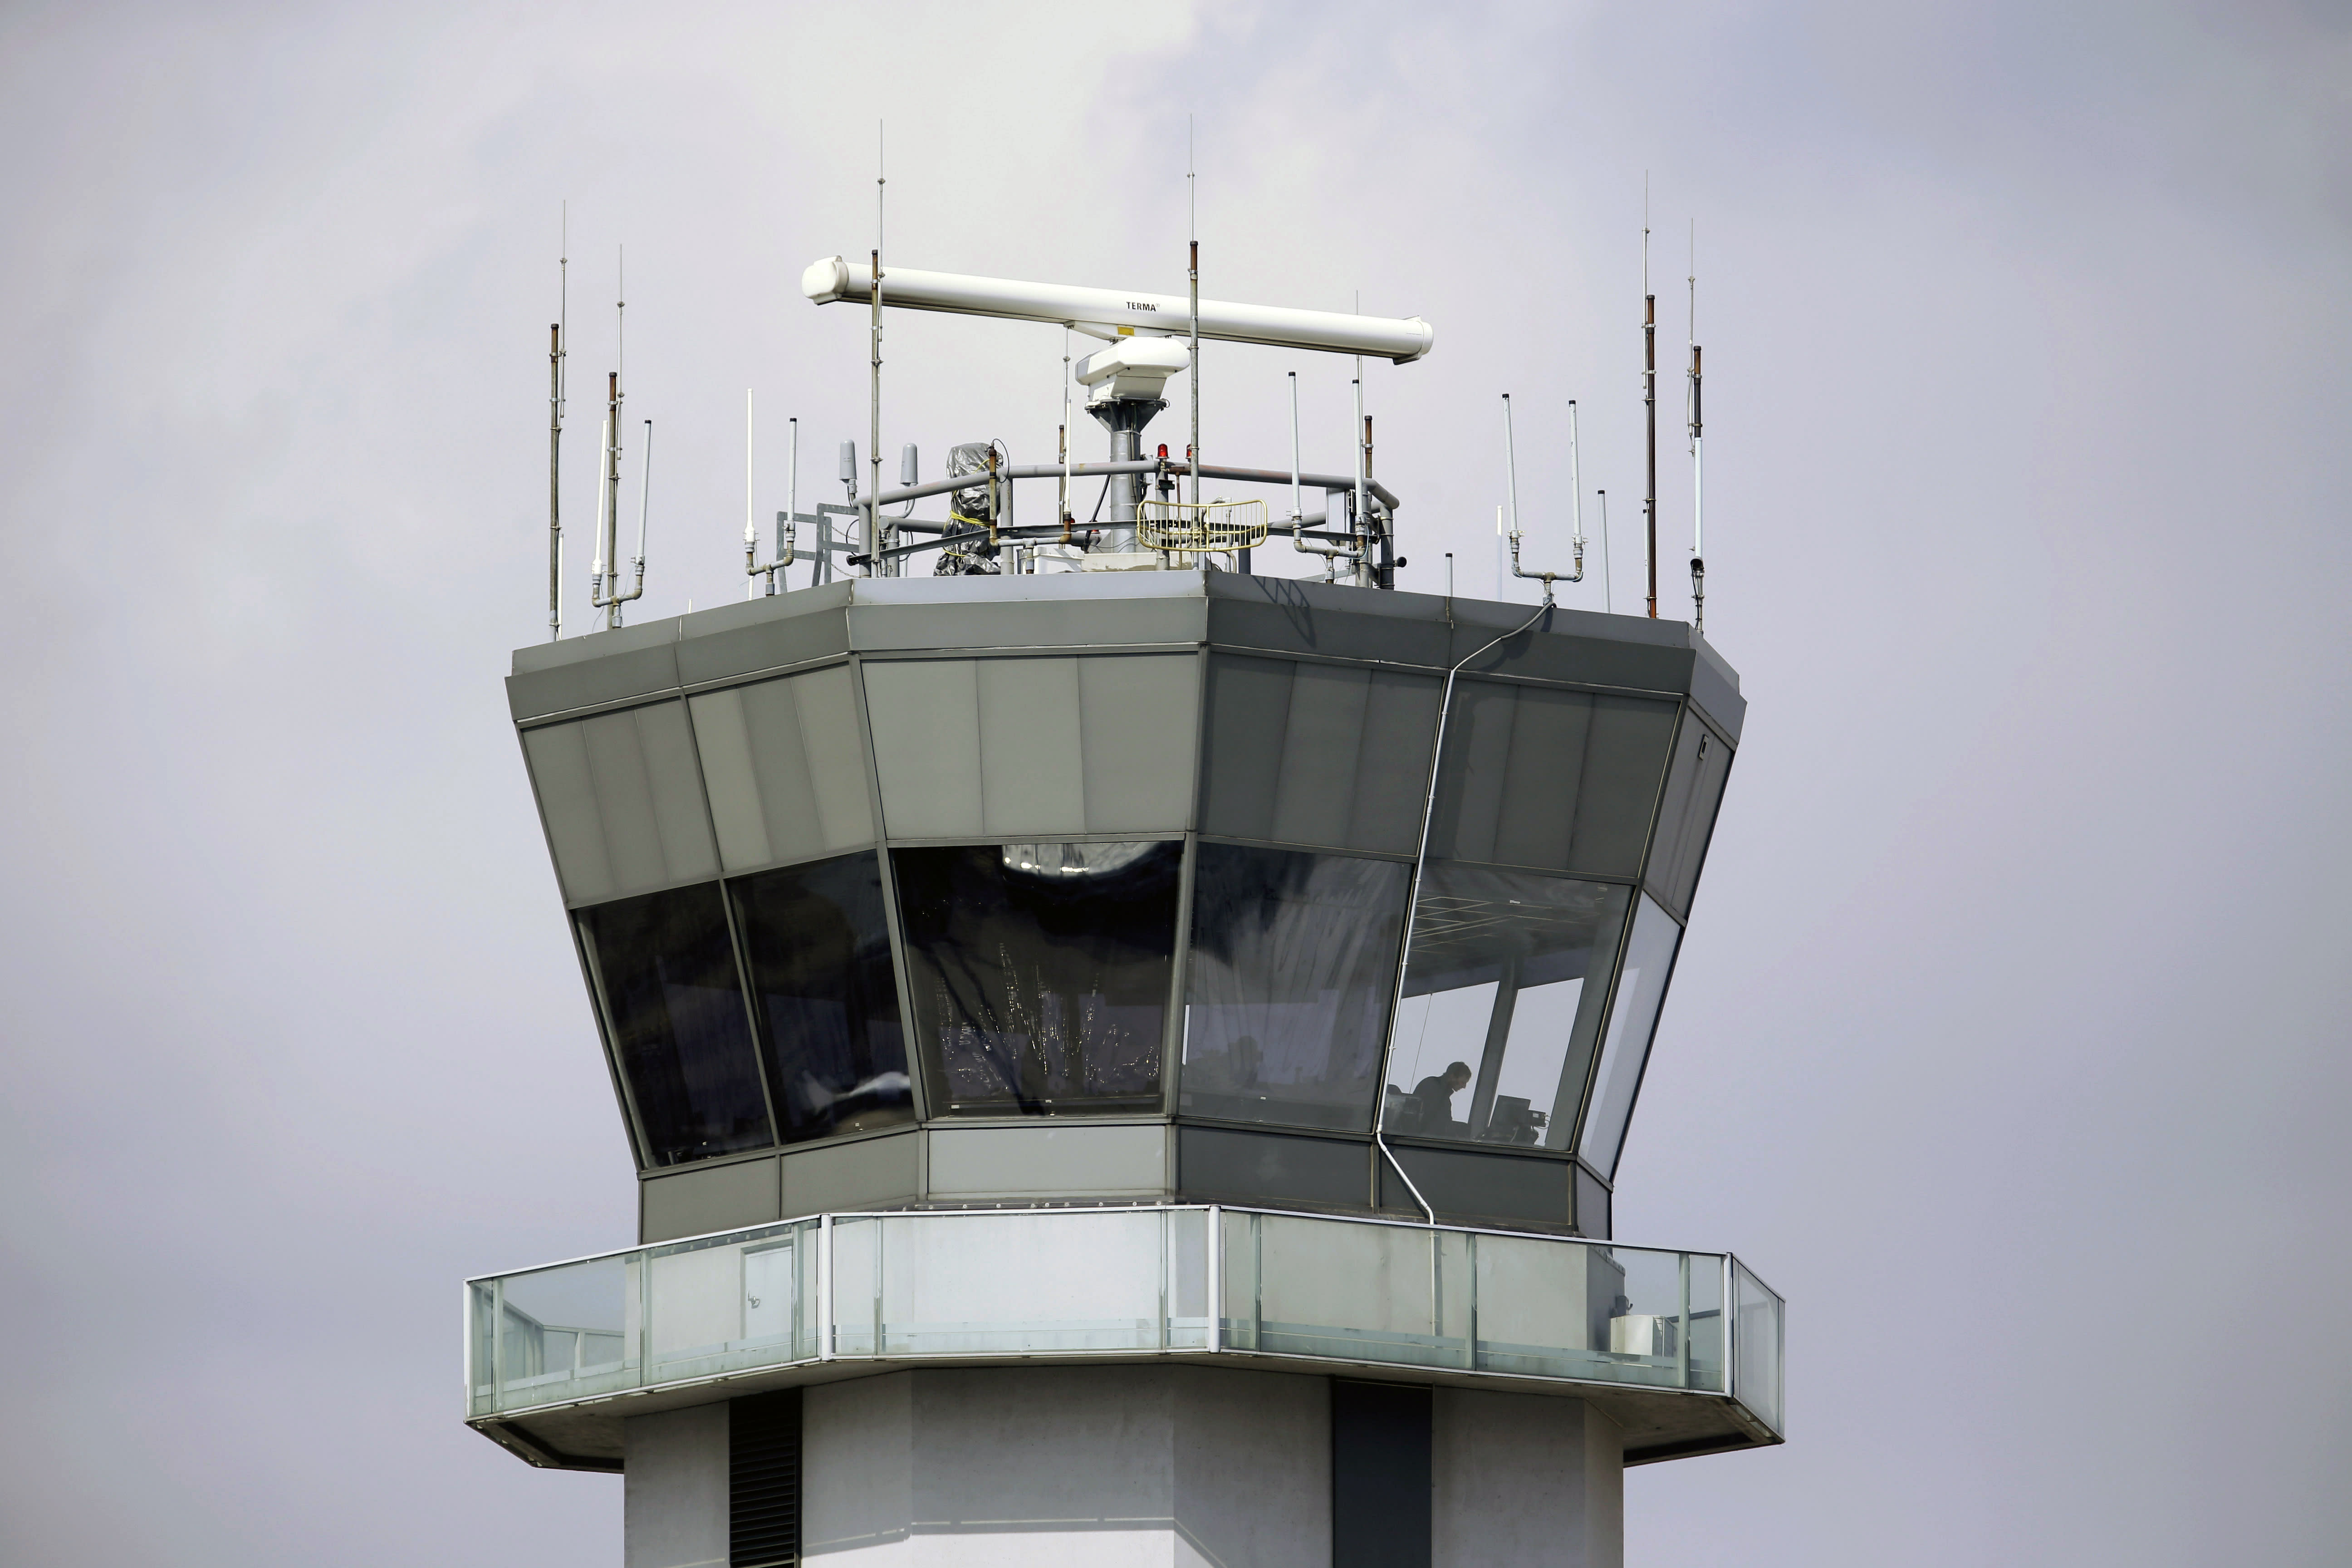 FAA: Tower at Chicago's Midway airport is closed after 'several' employees test positive for COVID-19